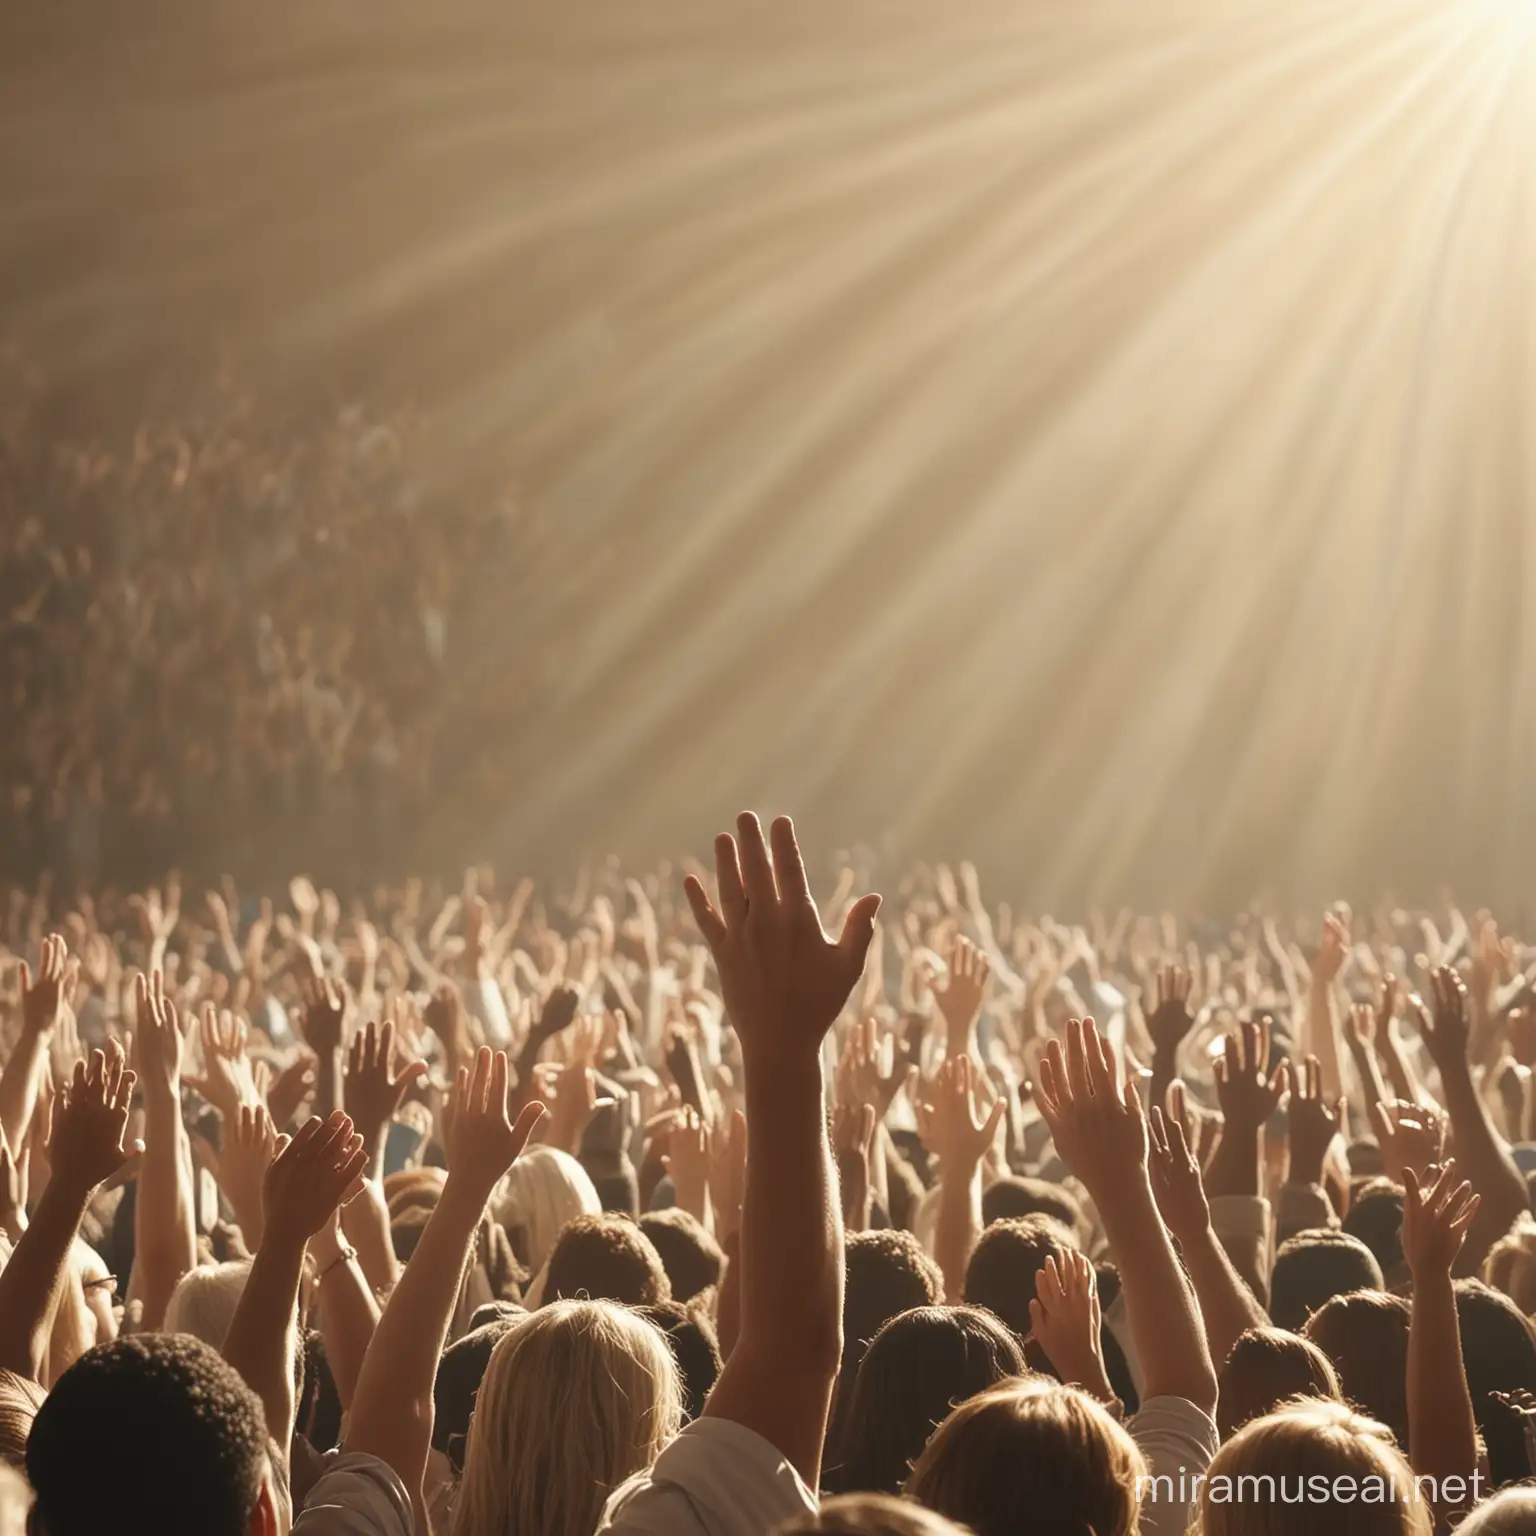 create an image of a crowd of people in a worship service. The people have their arms raised in praise. Make the image with a soft-focus natural background and natural lighting, ultra-fine detail, digital render, high definition, high quality, 16k resolution. Make the image in landscape mode.